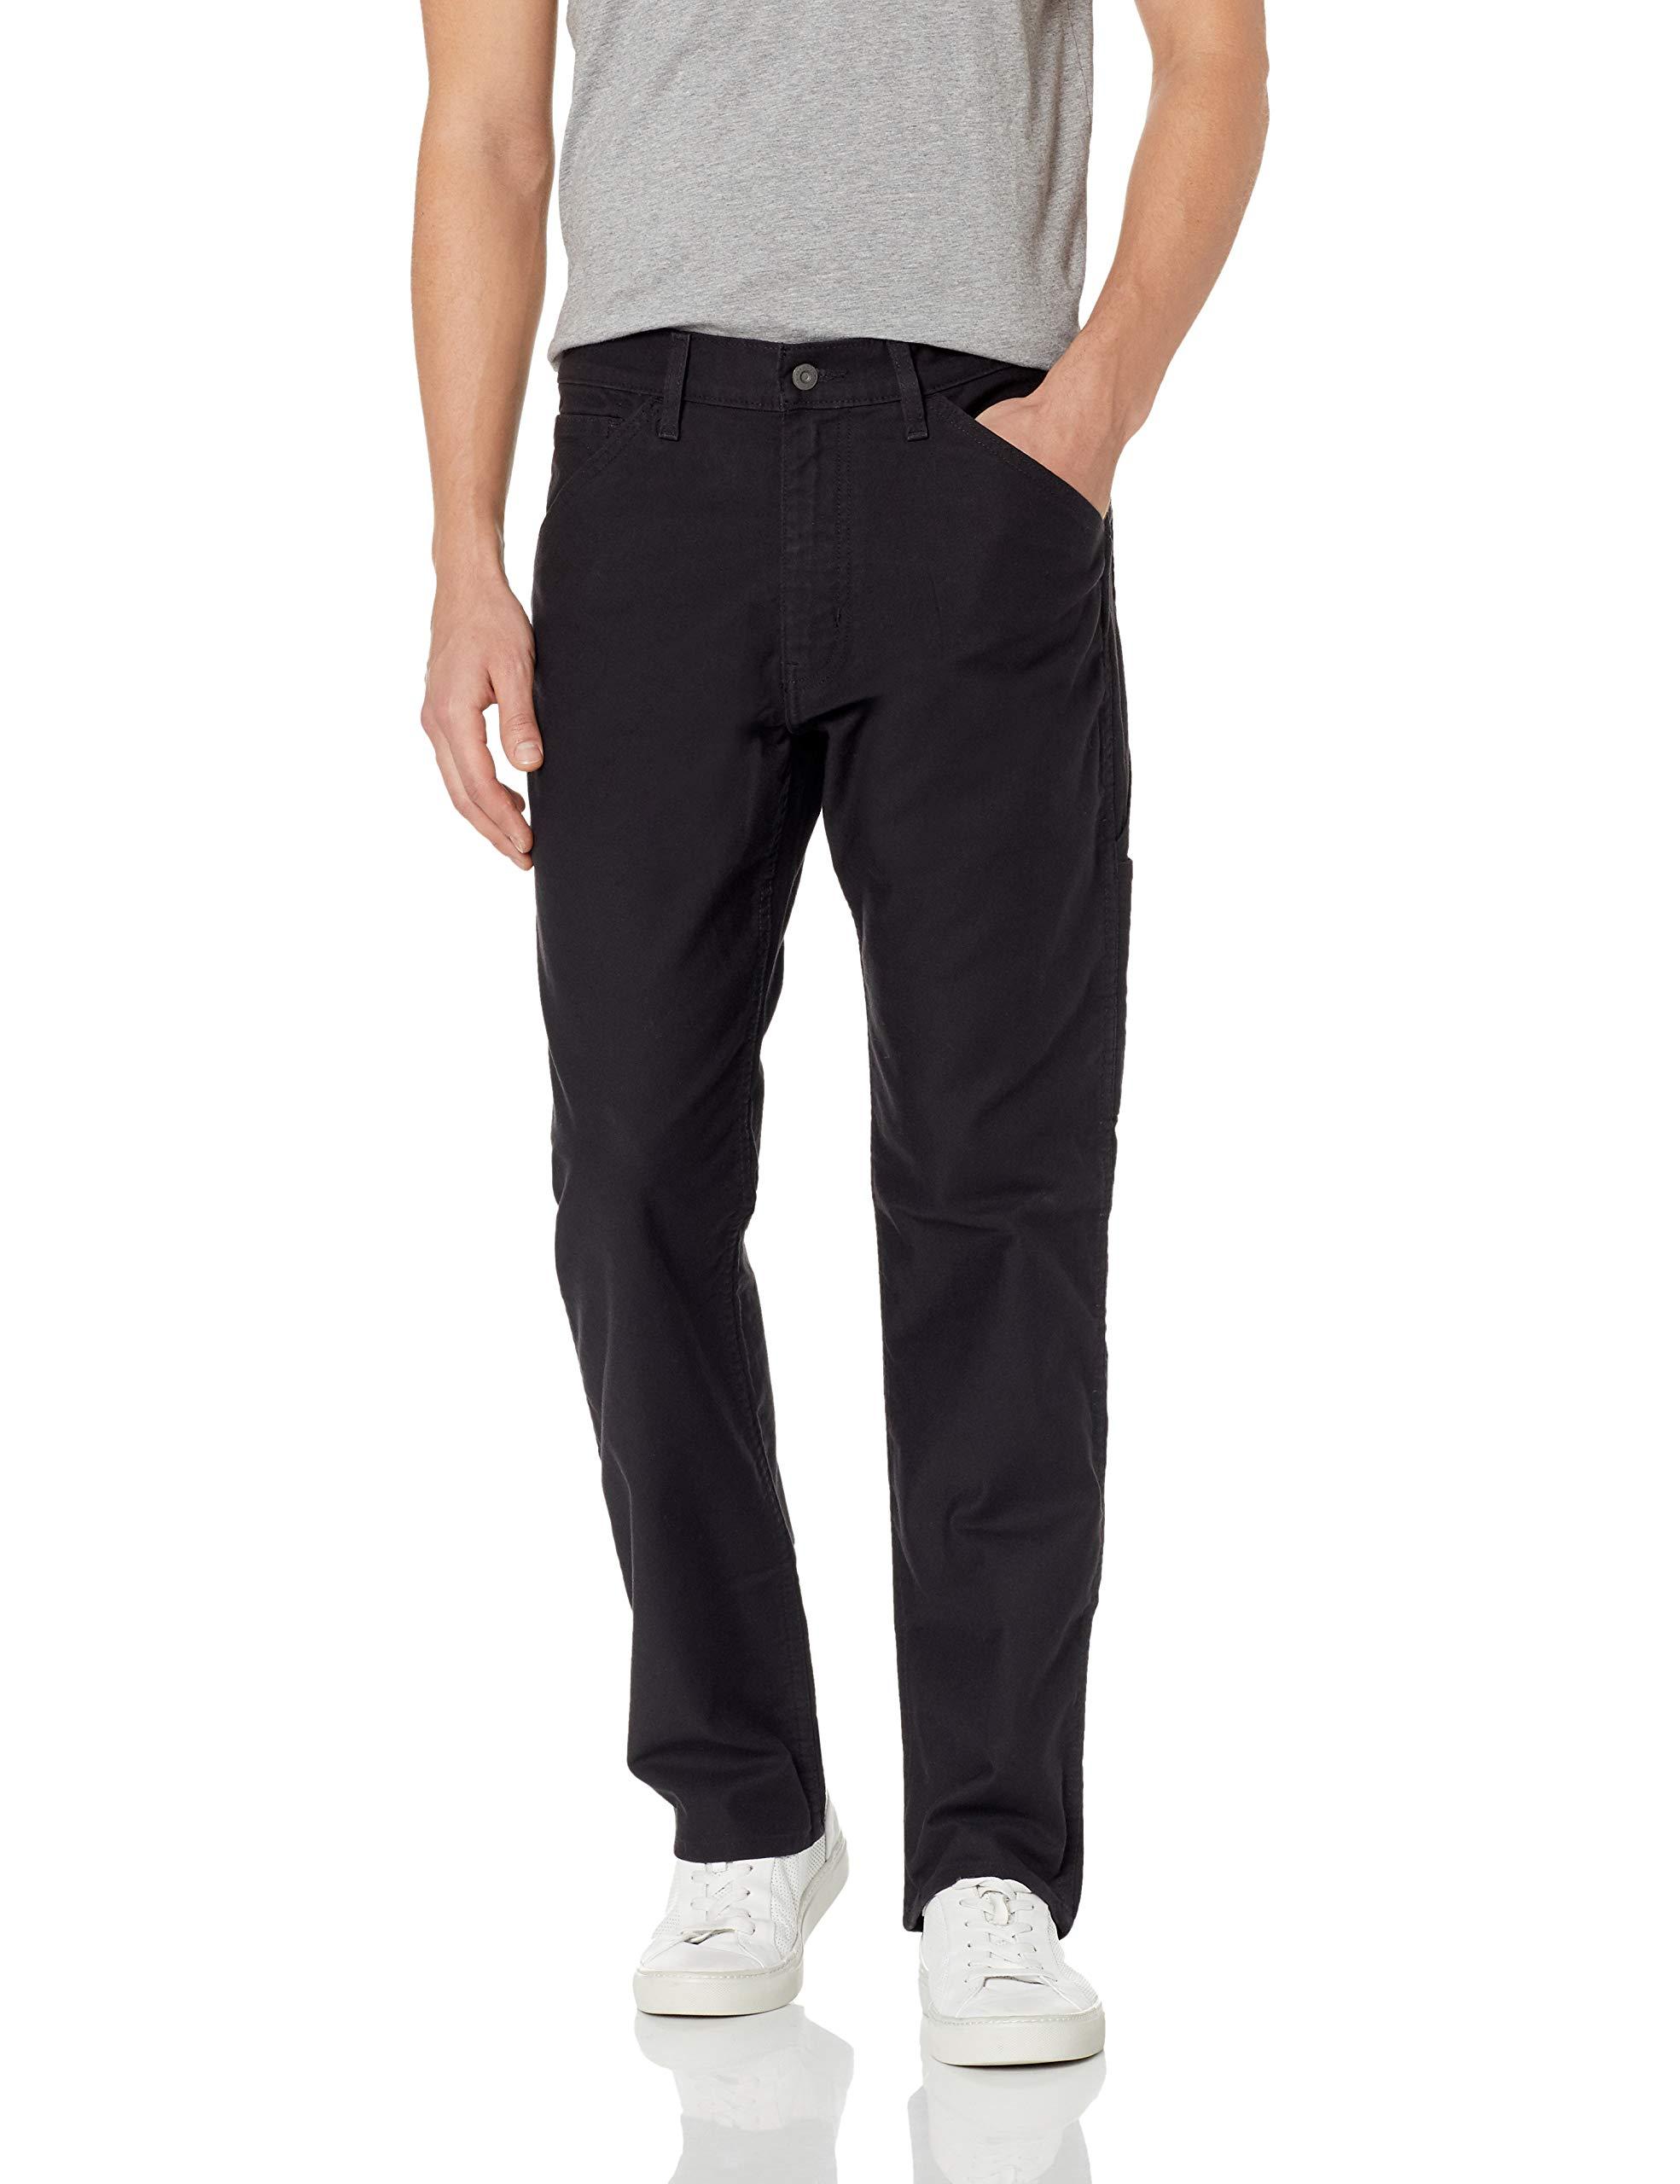 Levi's Workwear 545 Athletic Fit Utility Pant in Black for Men - Lyst